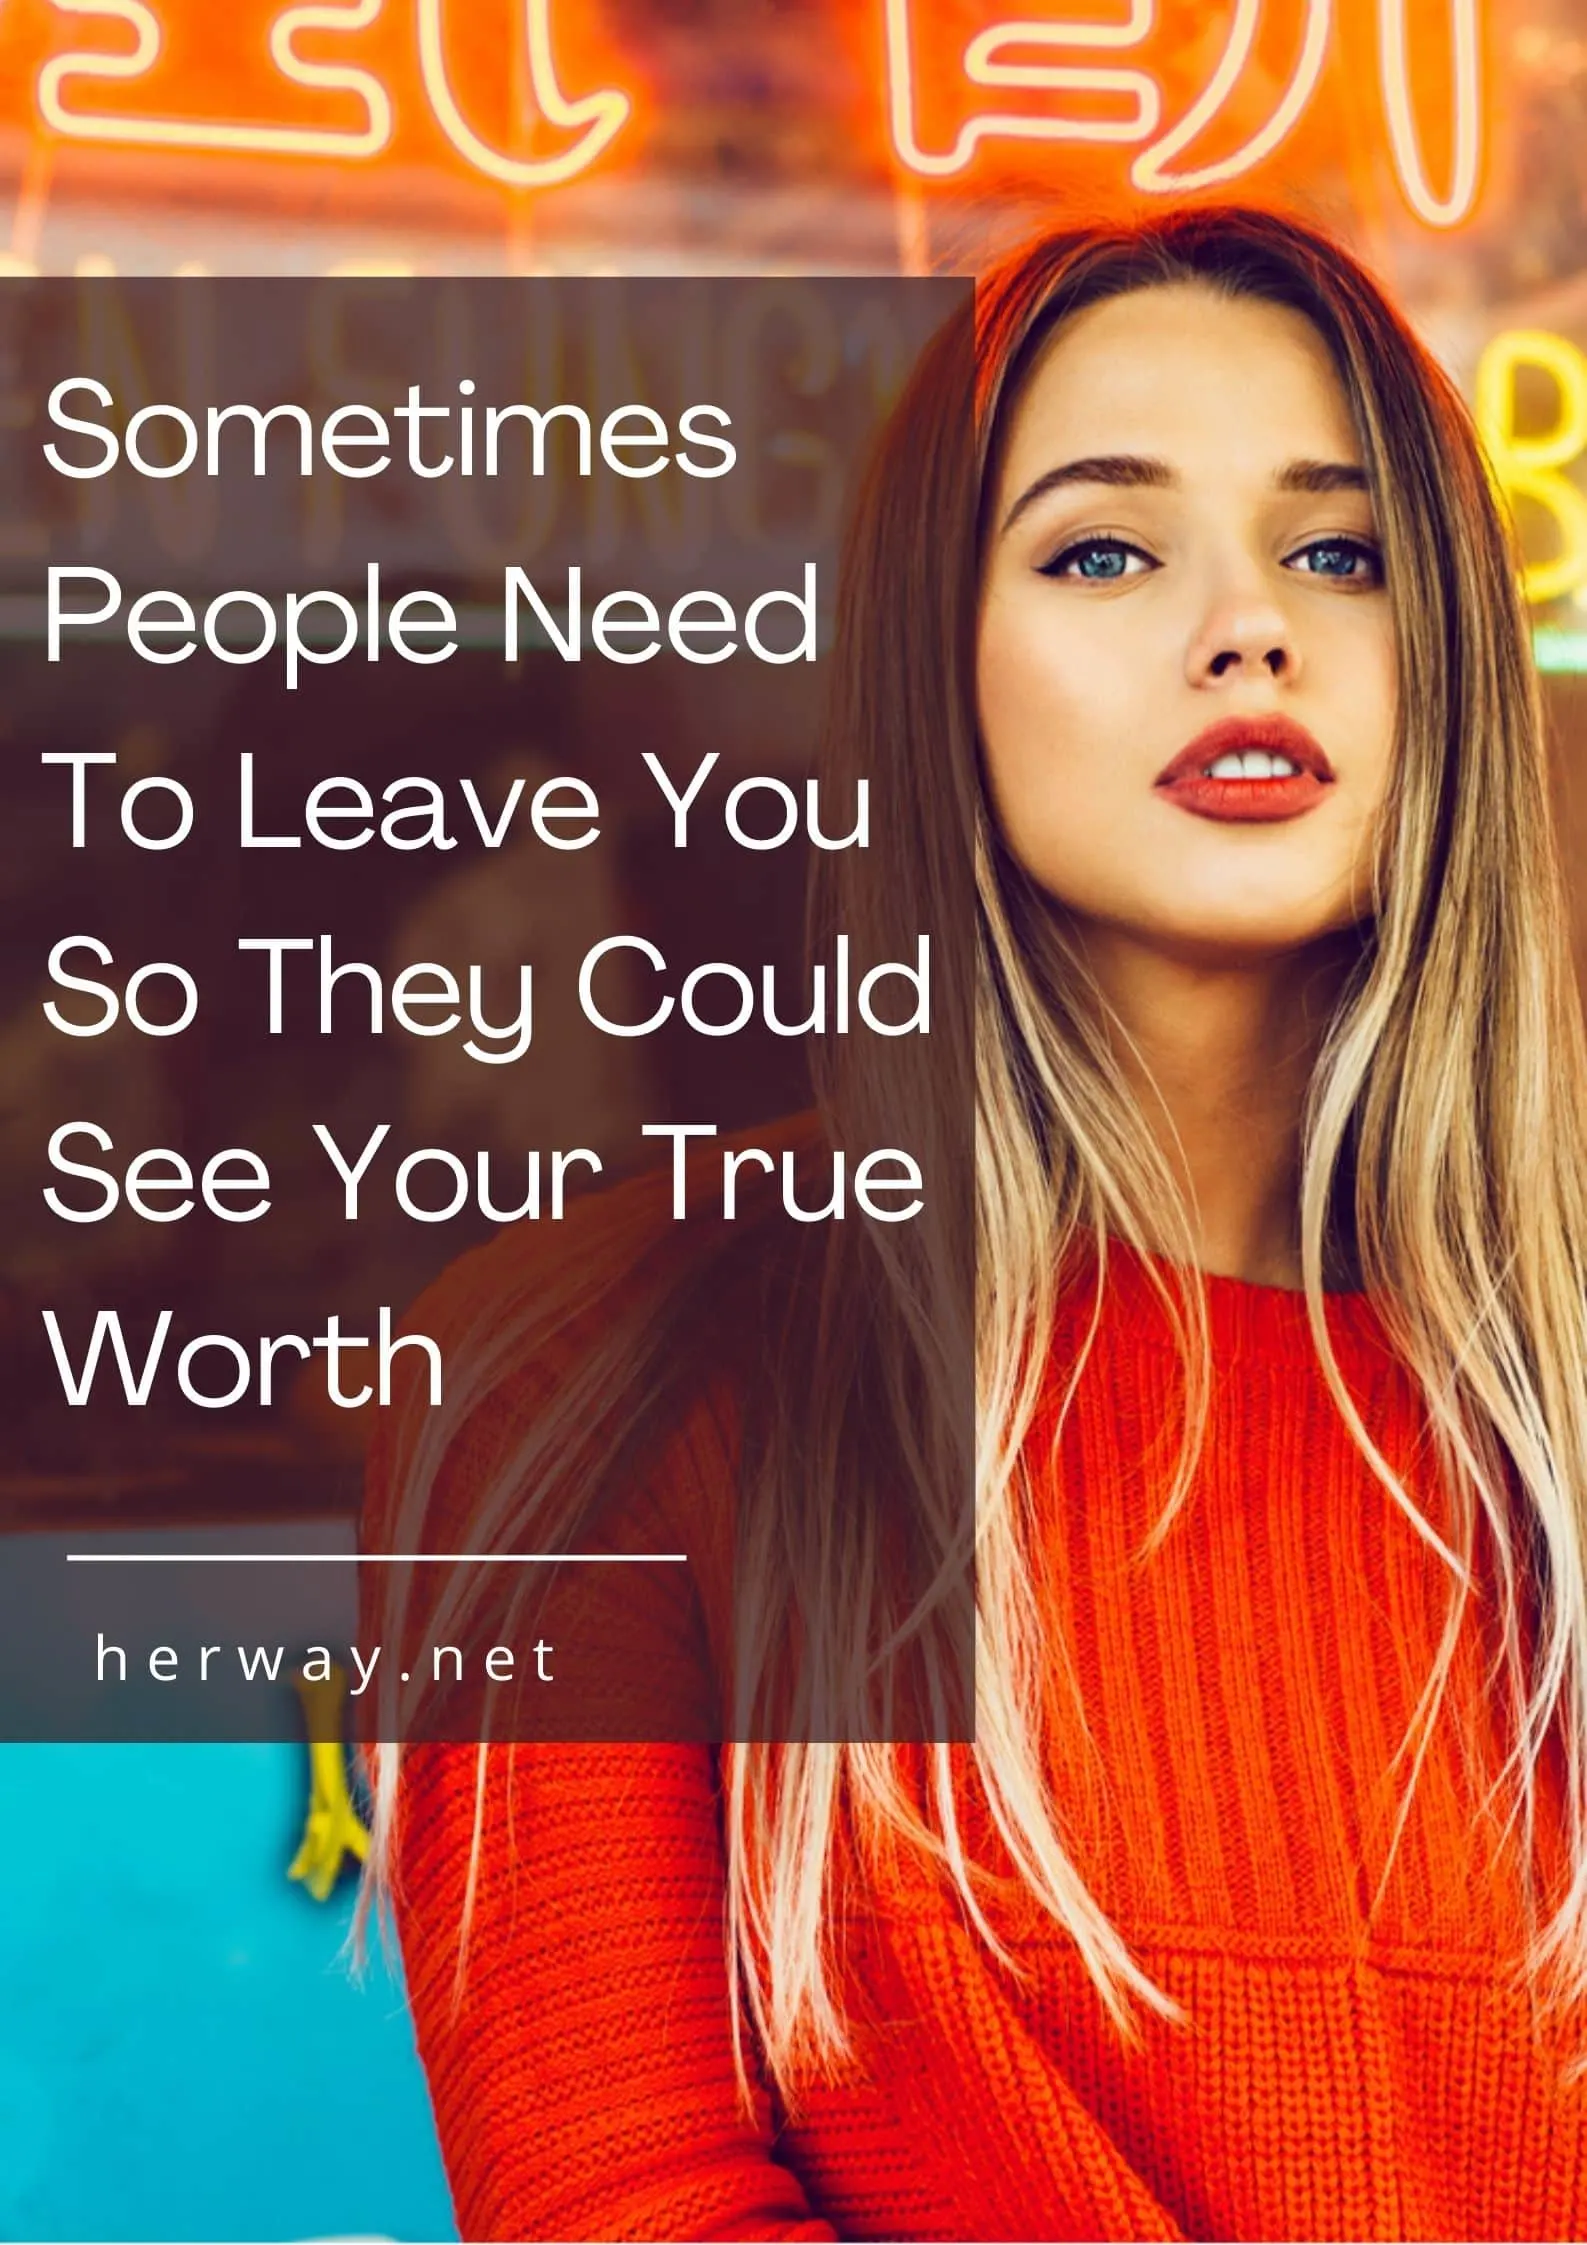 Sometimes People Need To Leave You So They Could See Your True Worth